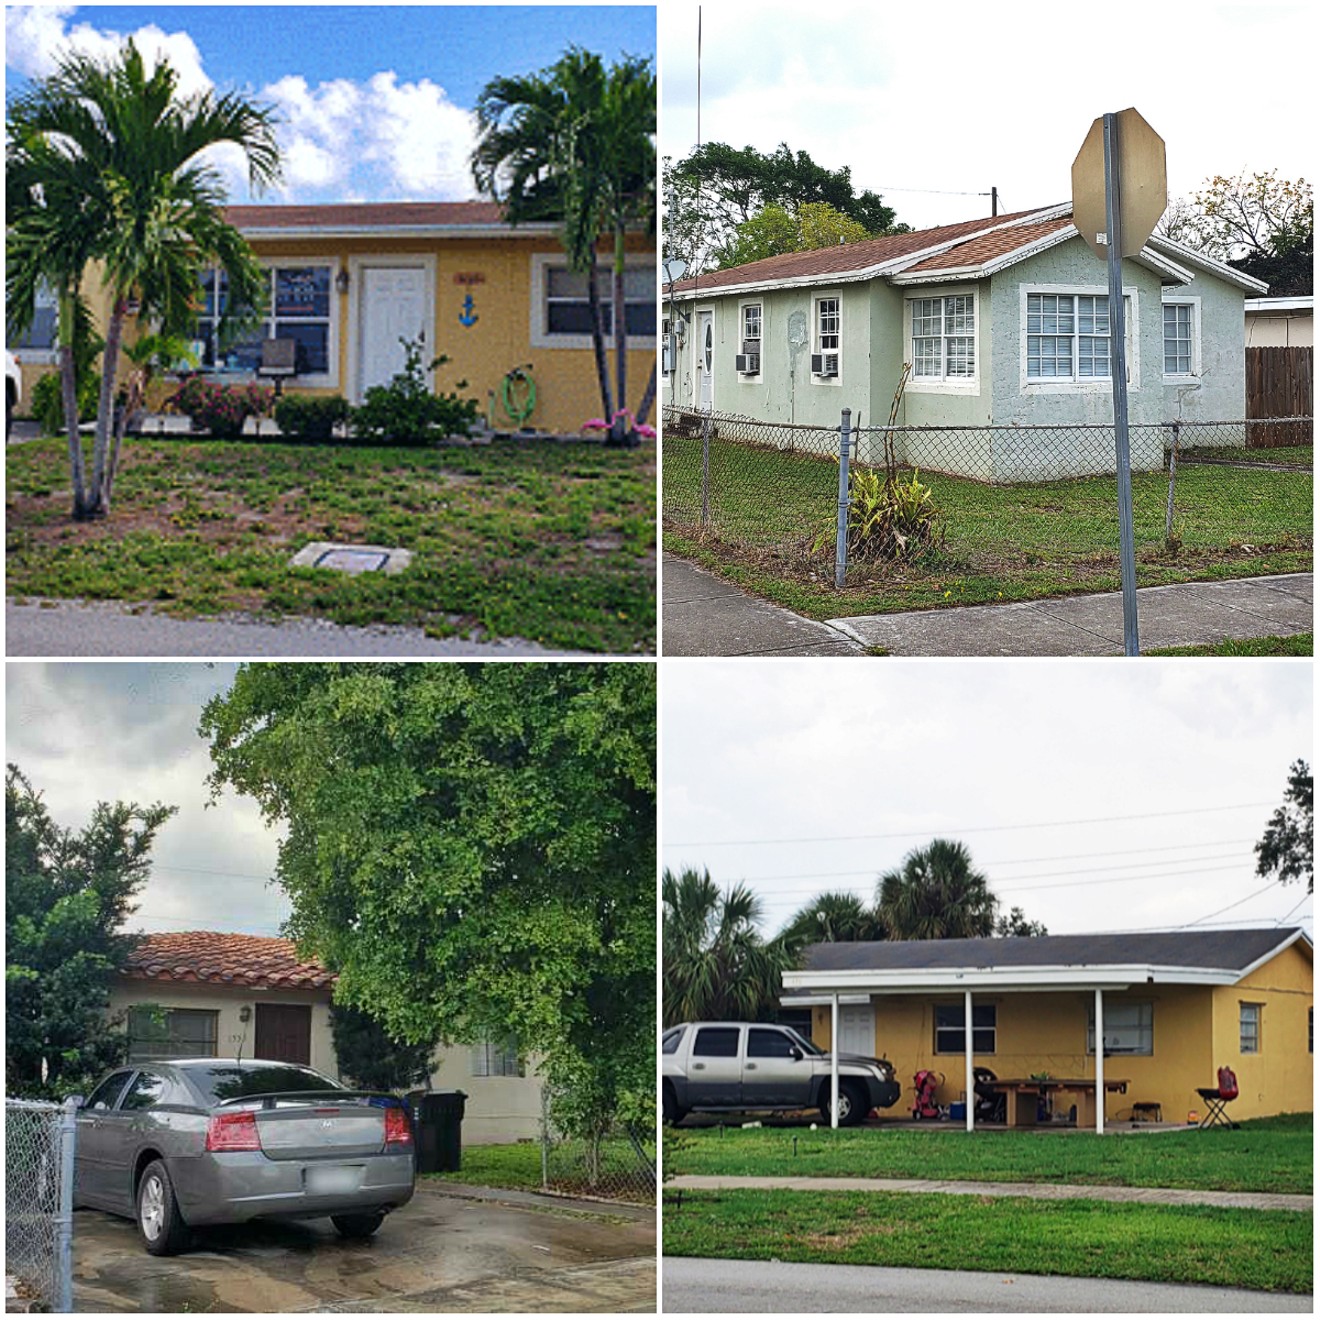 Four South Florida homes bought with dirty money (clockwise from top left): Pompano Beach, Hallandale Beach, North Miami Beach, and Deerfield Beach.